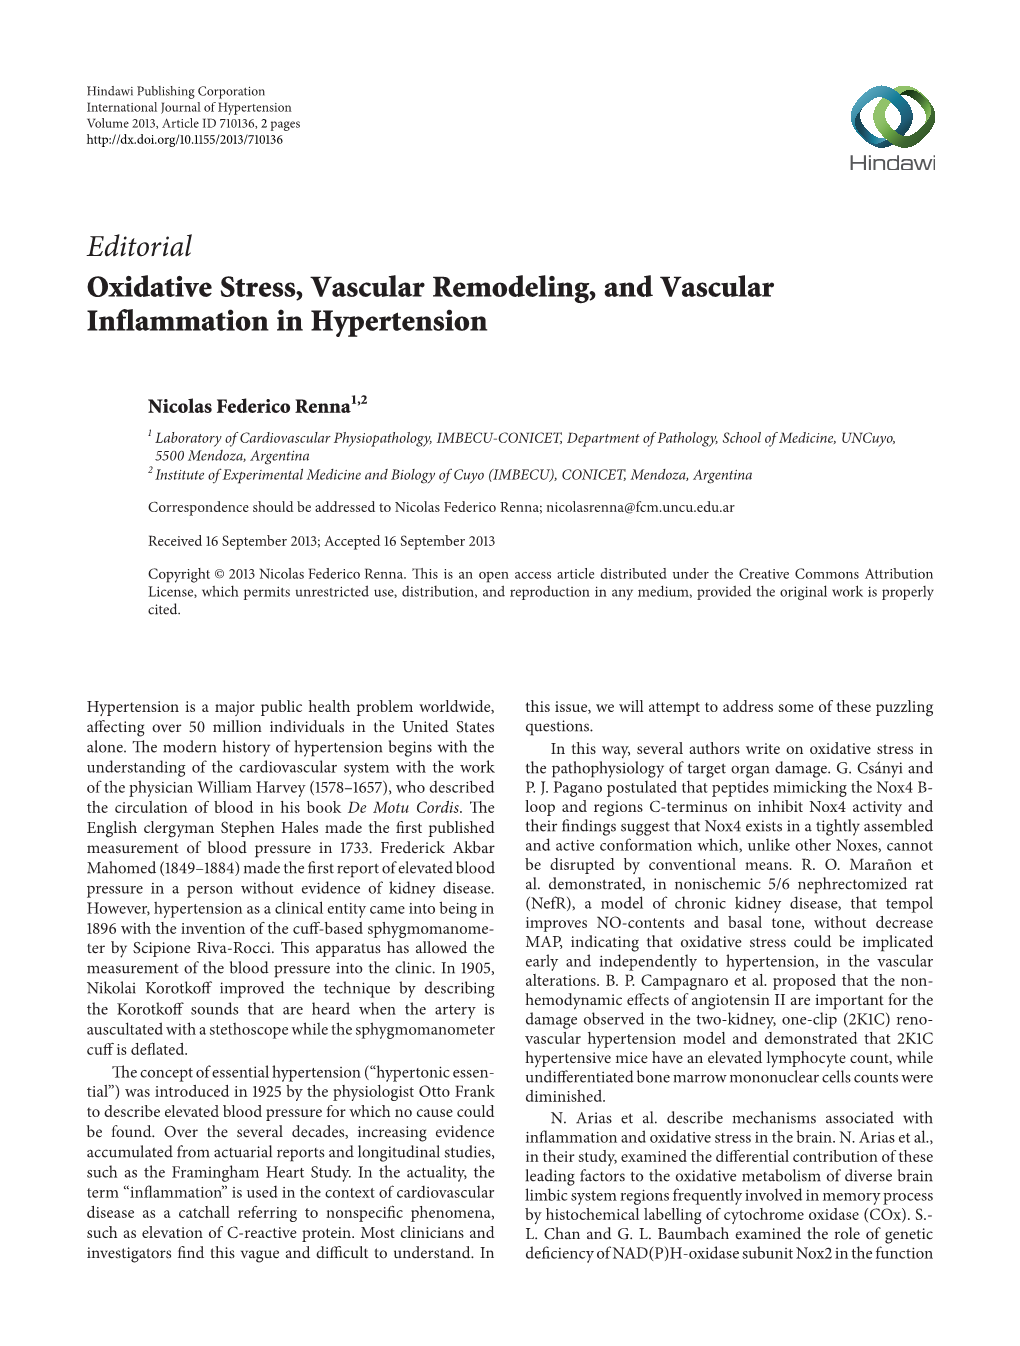 Editorial Oxidative Stress, Vascular Remodeling, and Vascular Inflammation in Hypertension